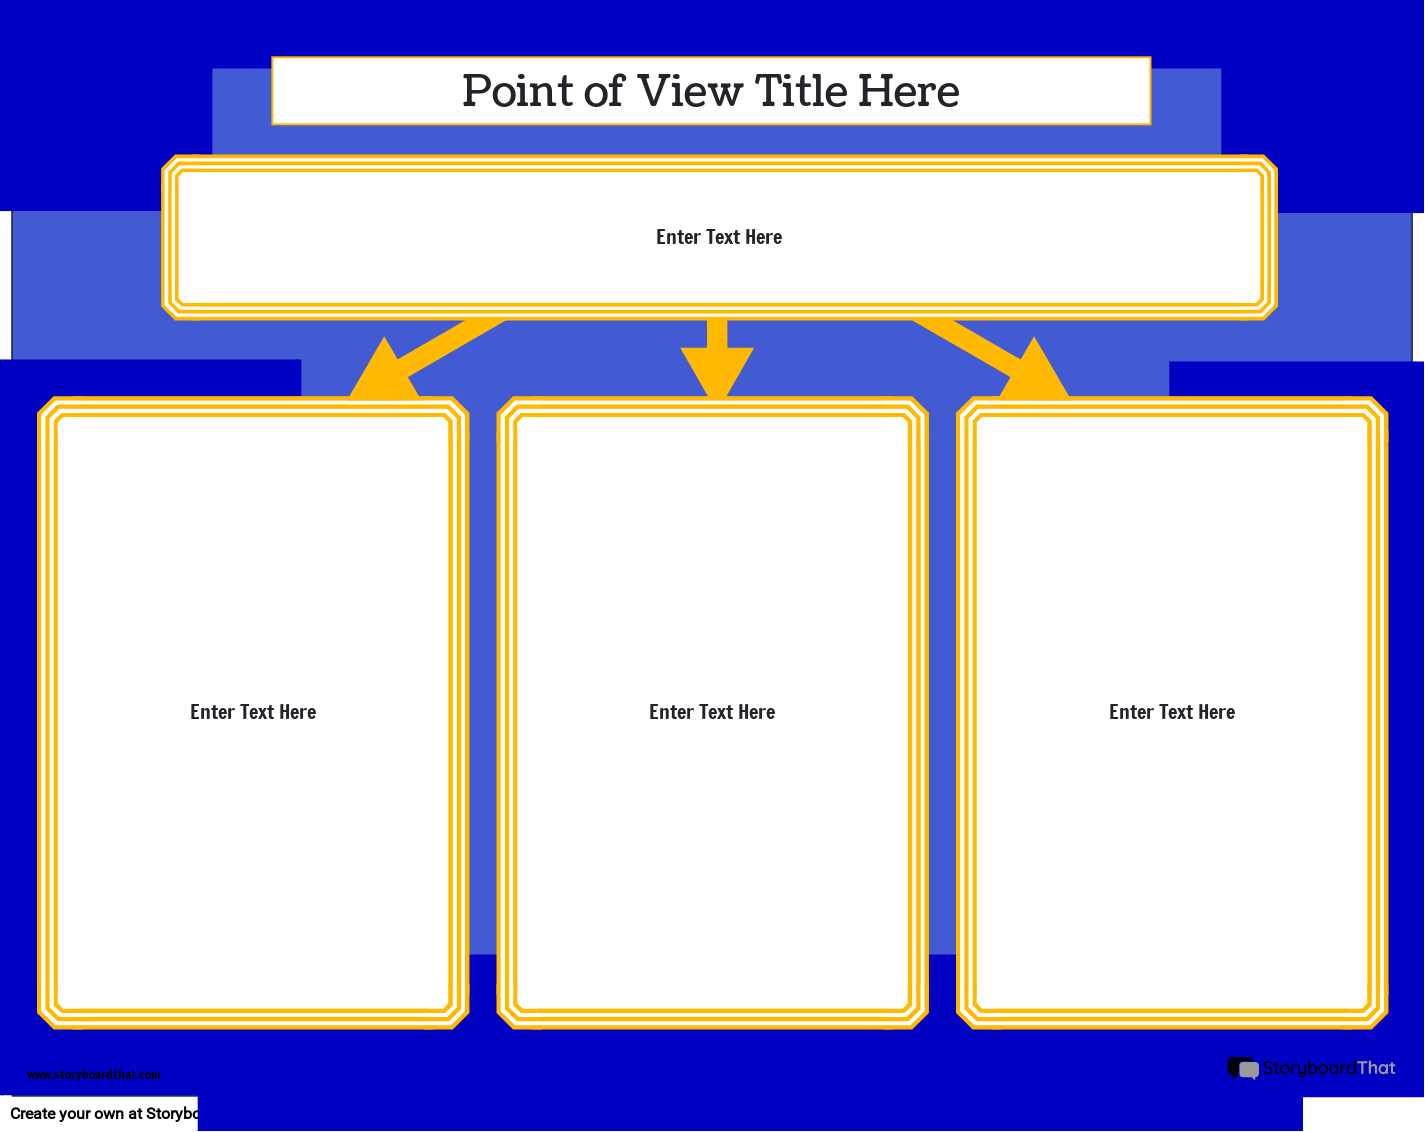 New Create Page Point of View Template 2